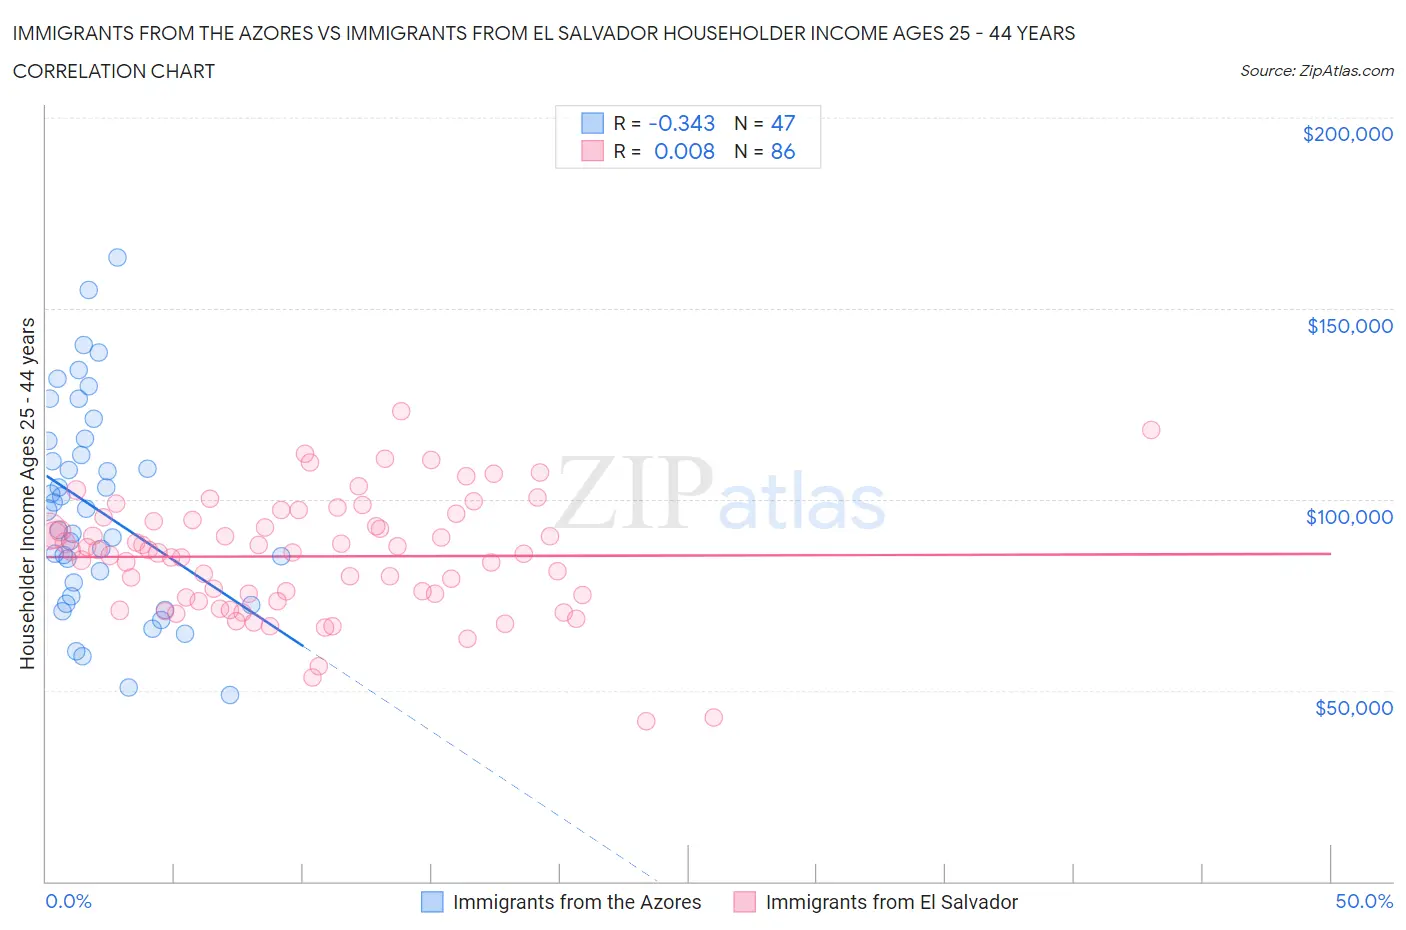 Immigrants from the Azores vs Immigrants from El Salvador Householder Income Ages 25 - 44 years